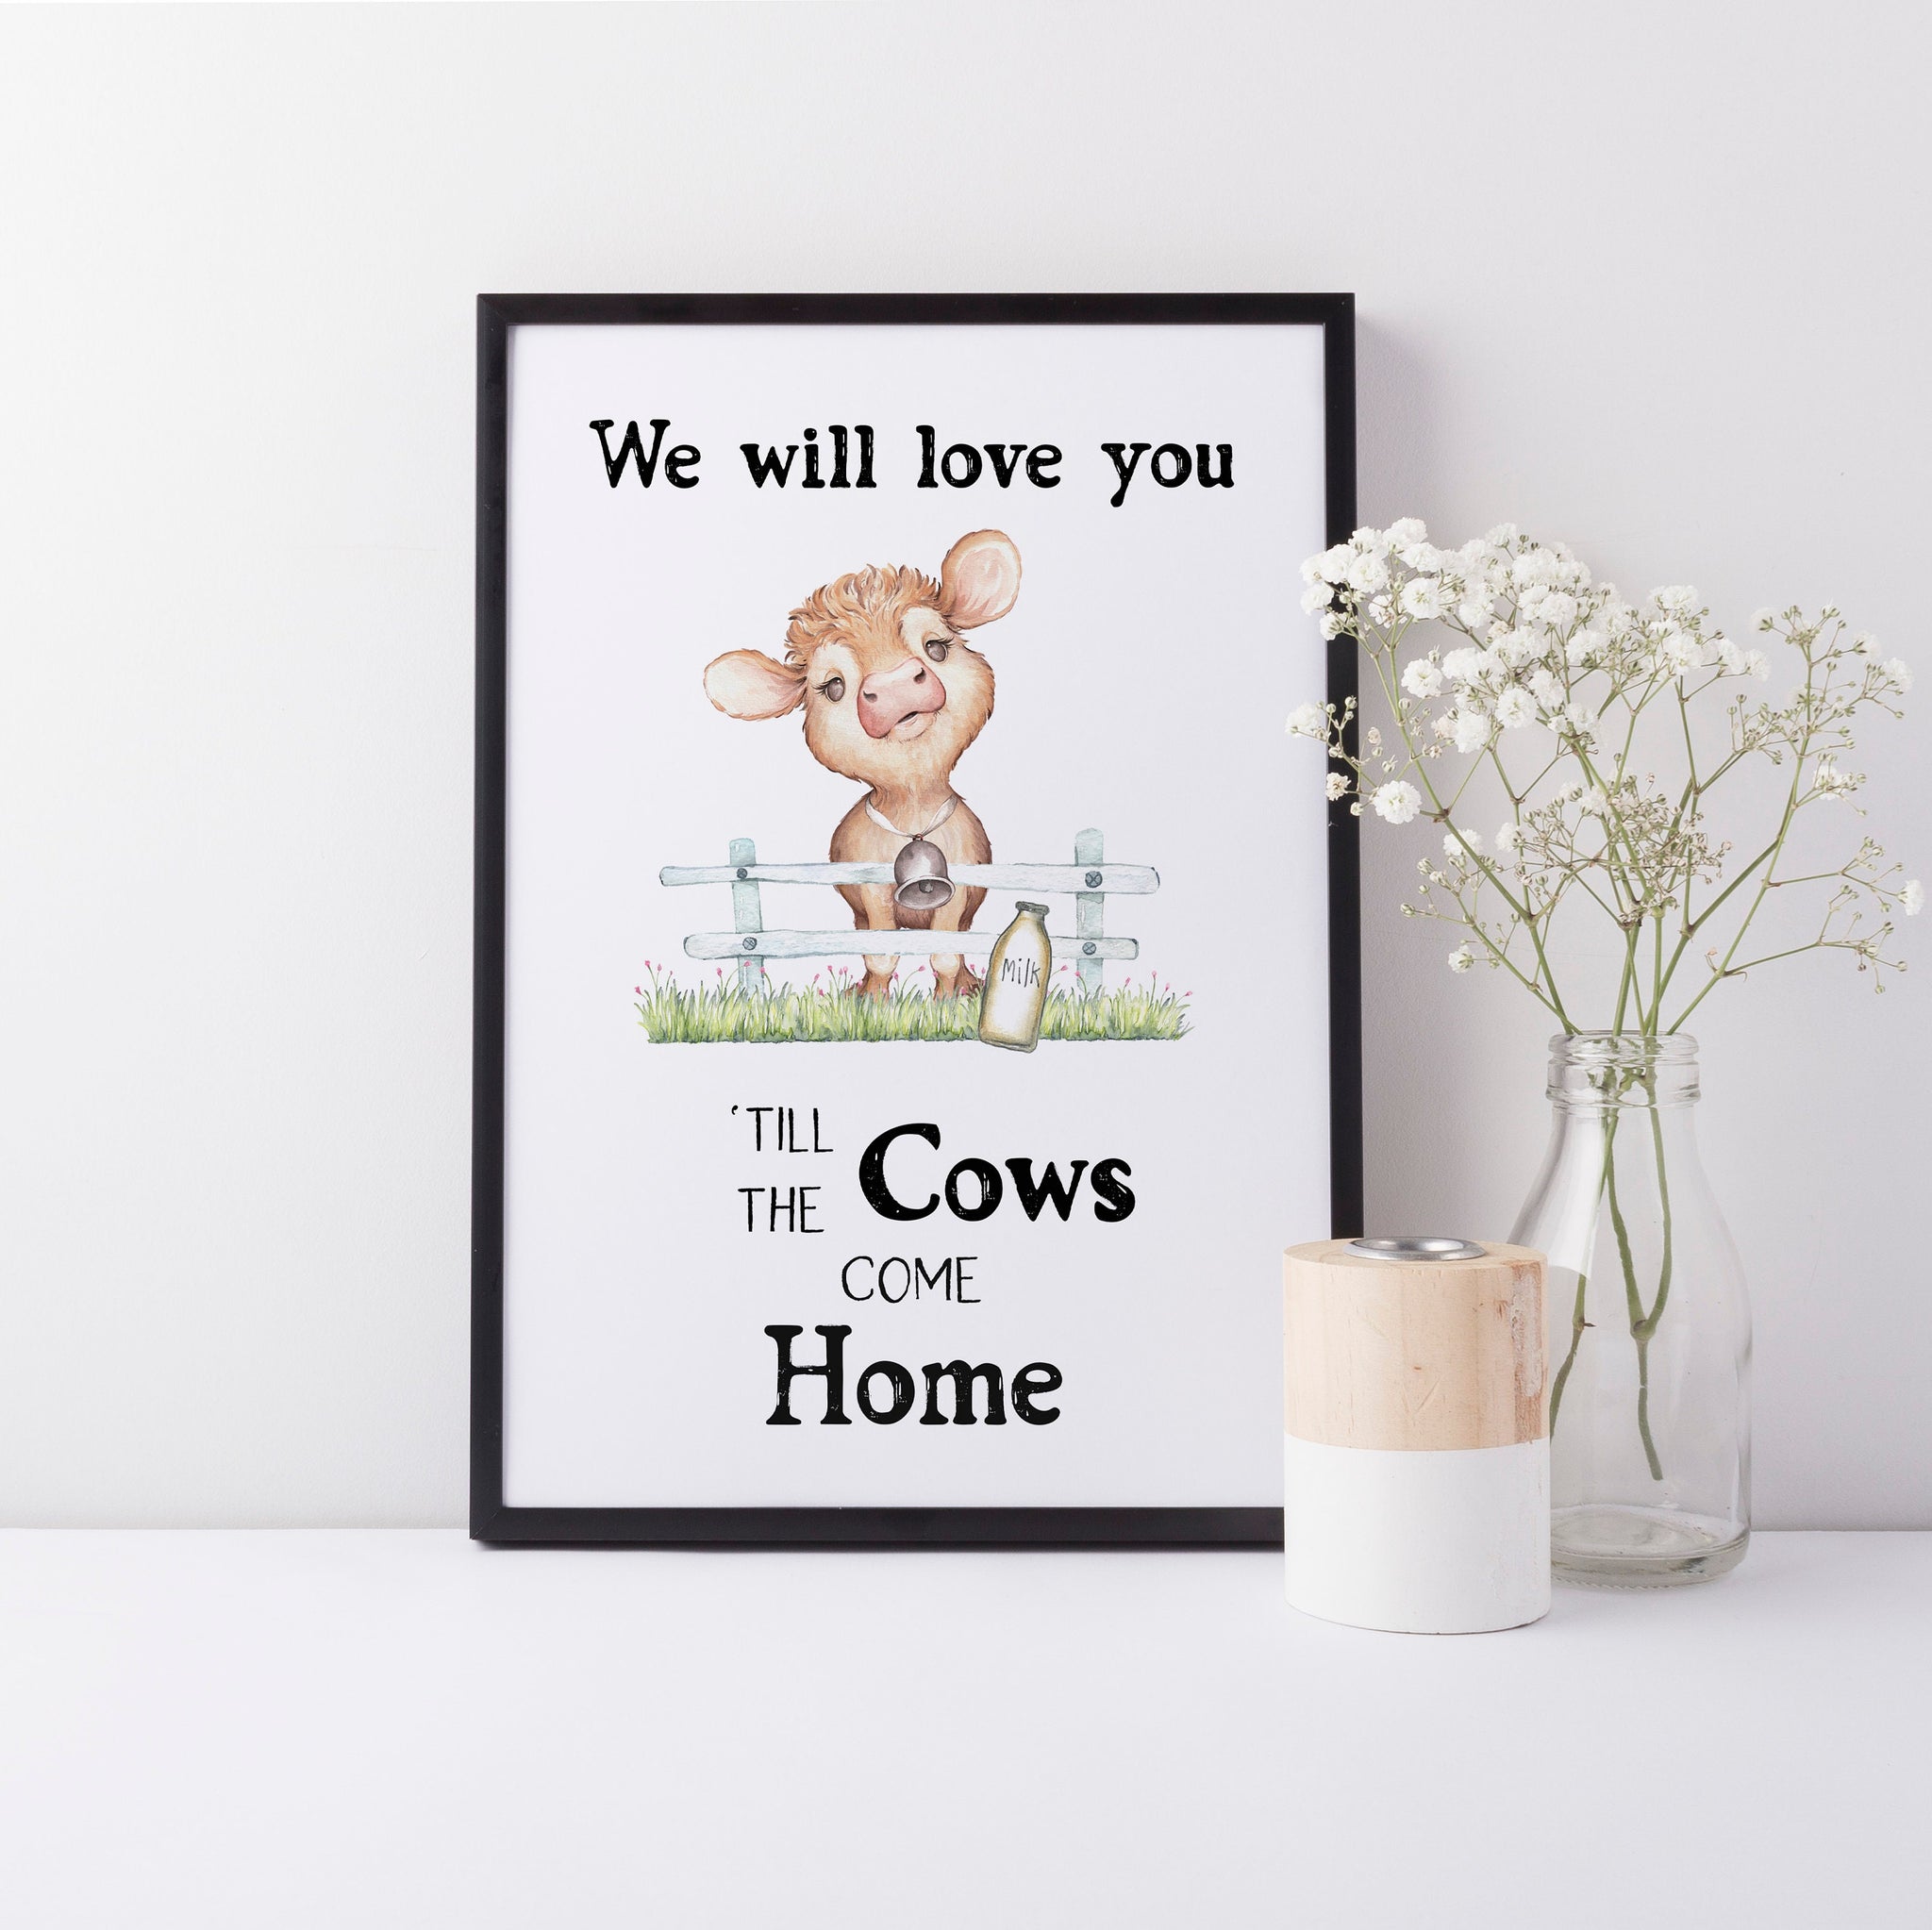 Farm Yard Baby Calf Nursery Print, "We Will Love You Until the Cows Come Home"  Quote, Farm Animal Wall Art Baby Nursery Decoration